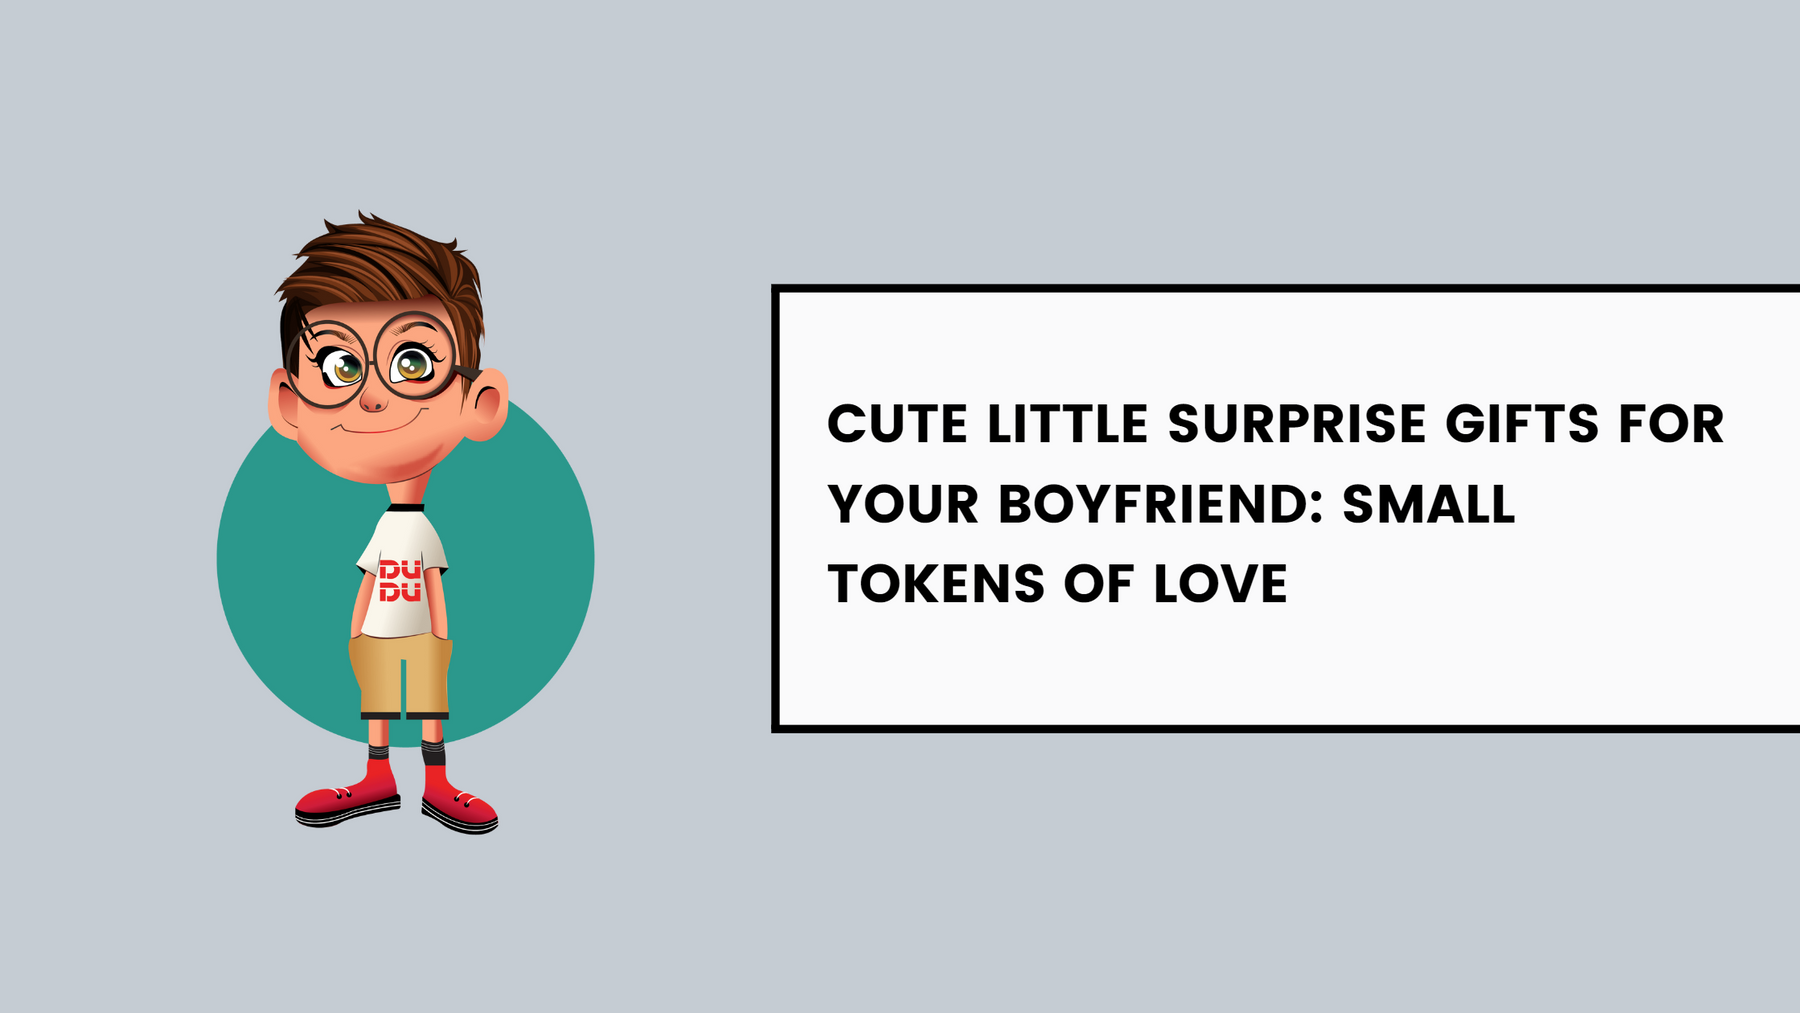 Cute Little Surprise Gifts For Your Boyfriend: Small Tokens Of Love